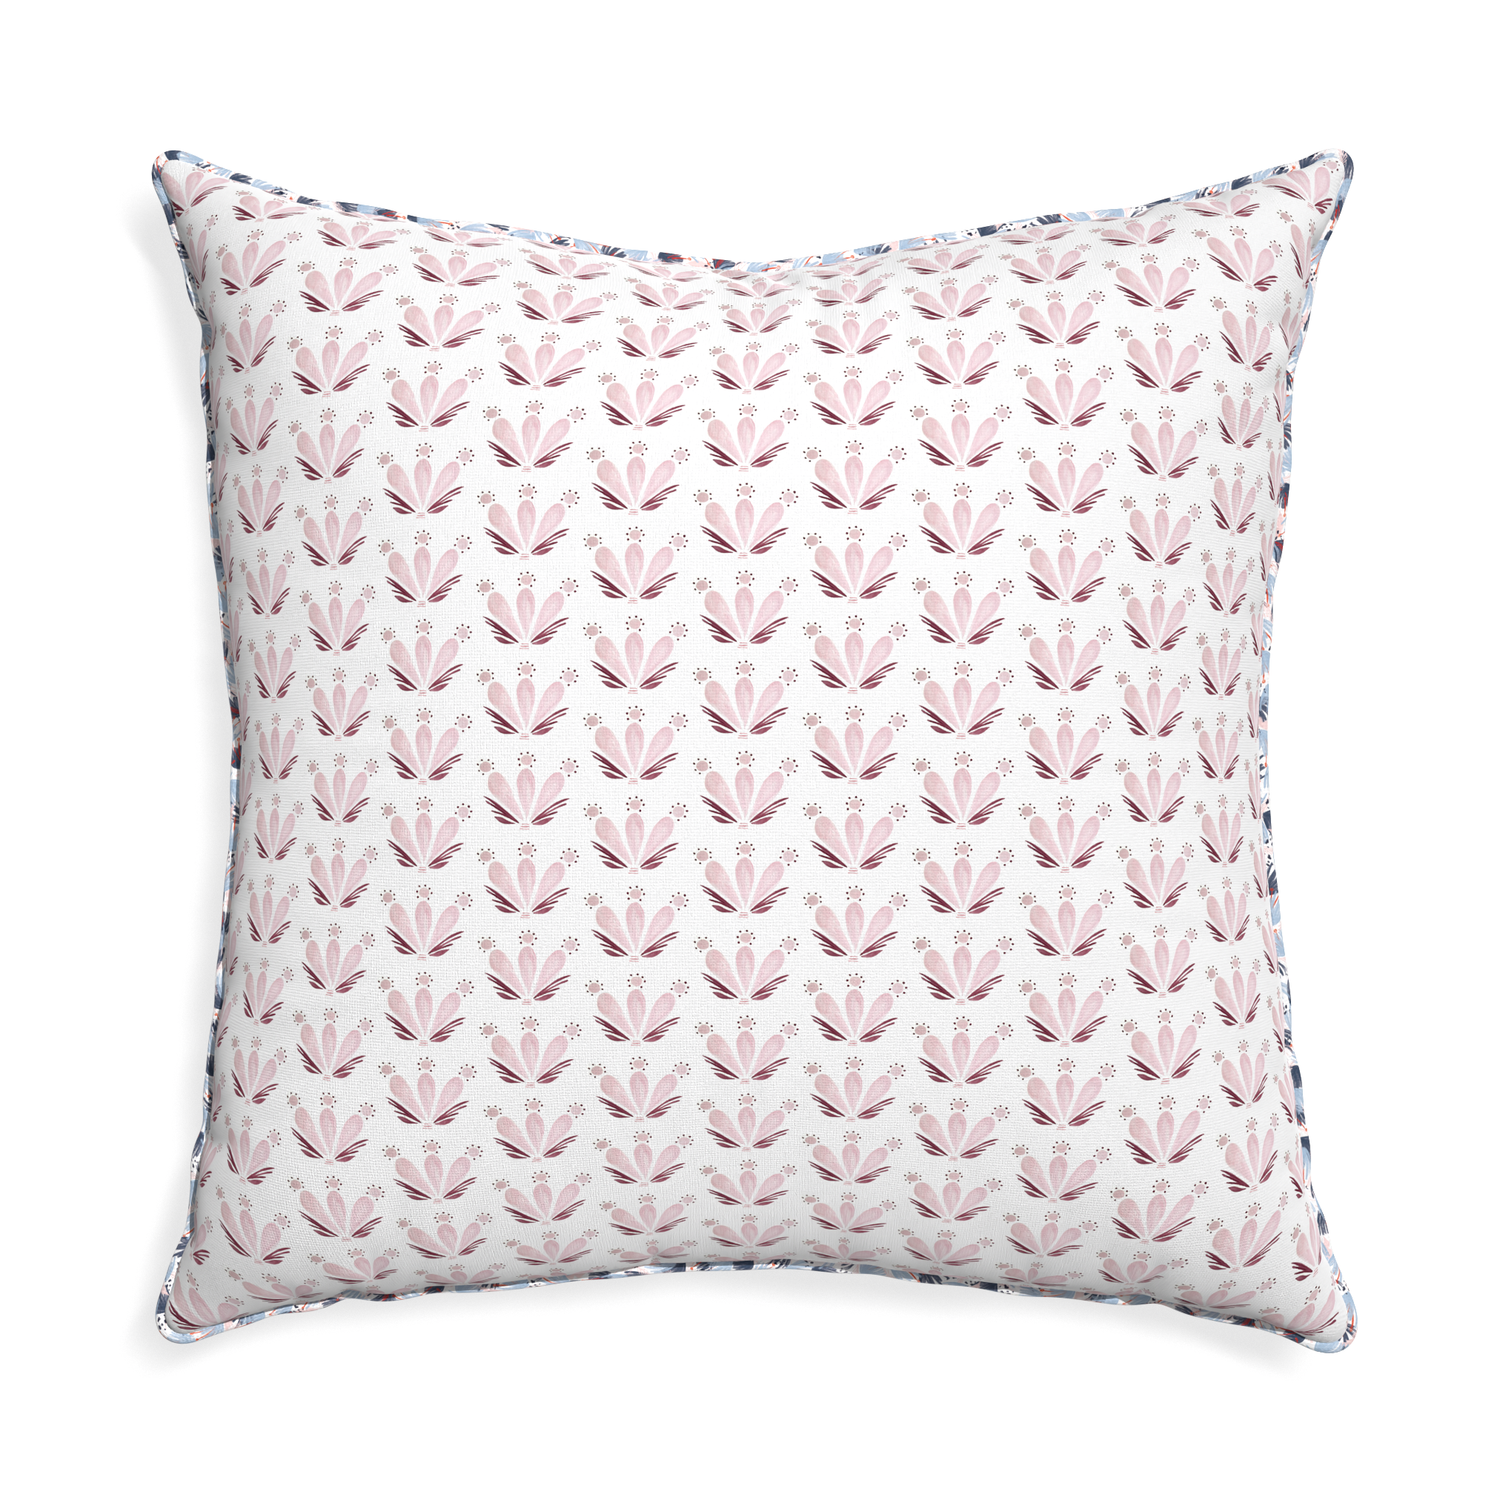 Euro-sham serena pink custom pillow with e piping on white background